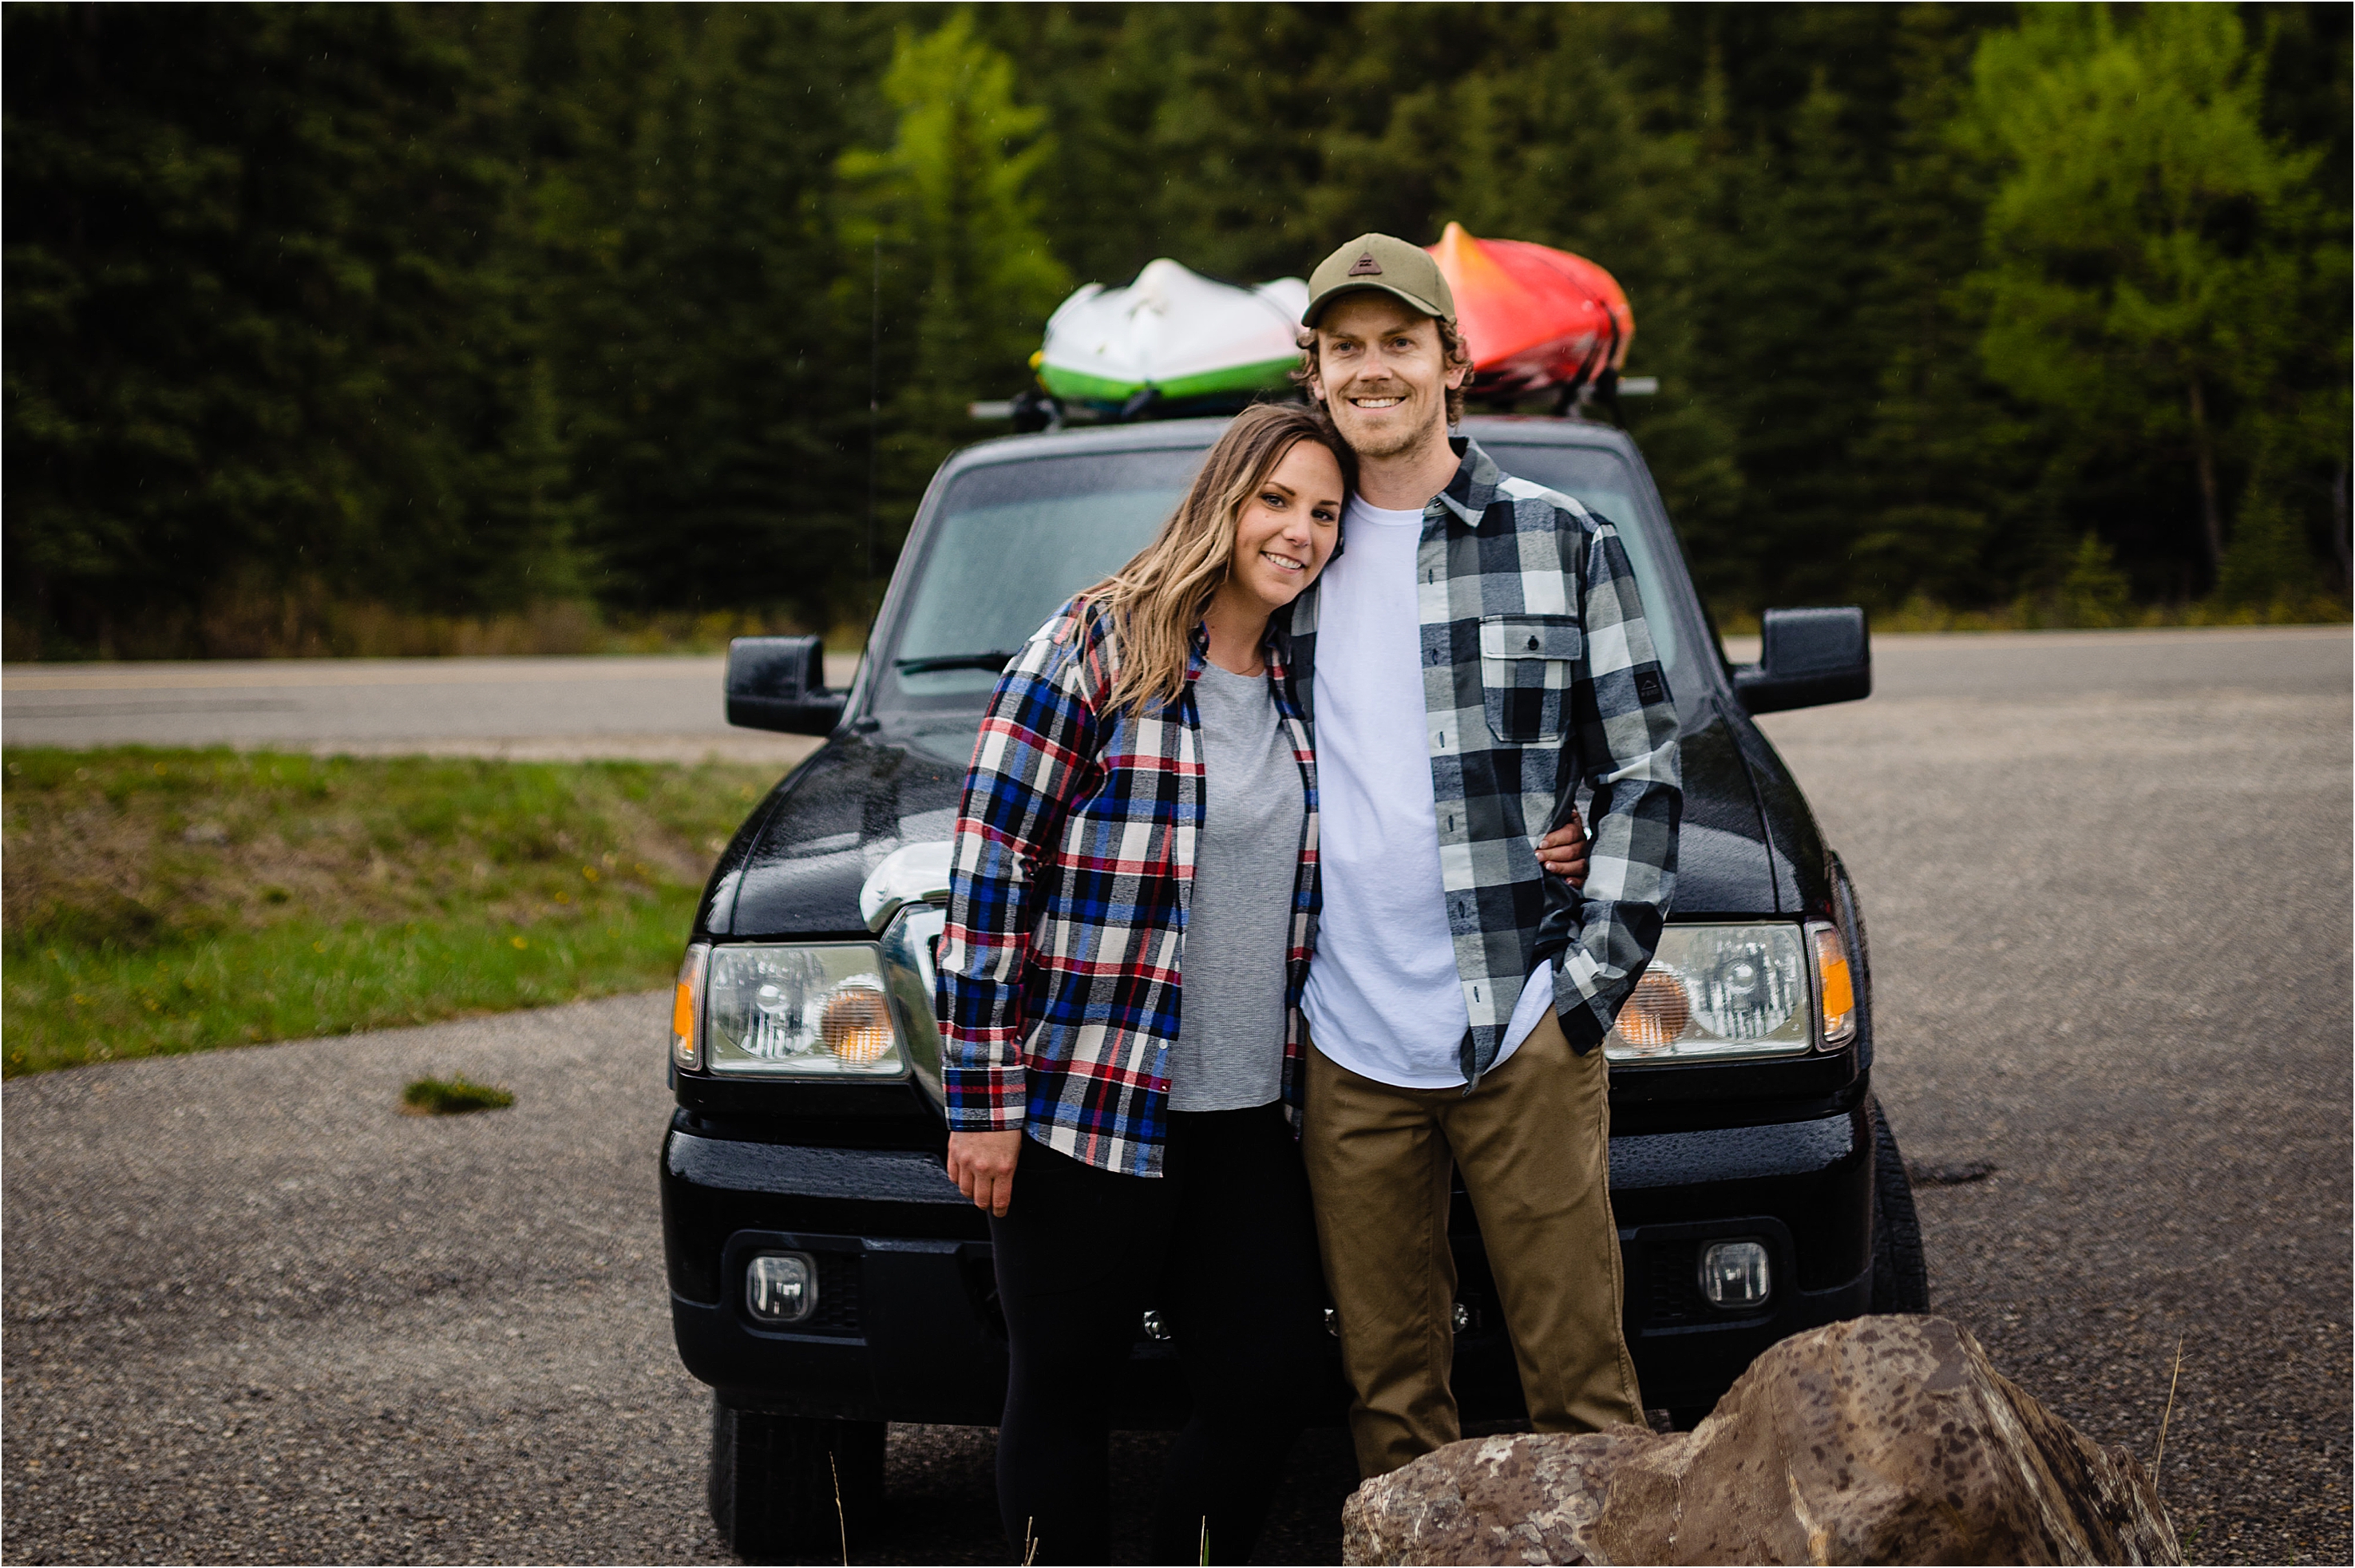 Banff engagement photos of Yvonne and Tim in front of their adventure truck and kayaks